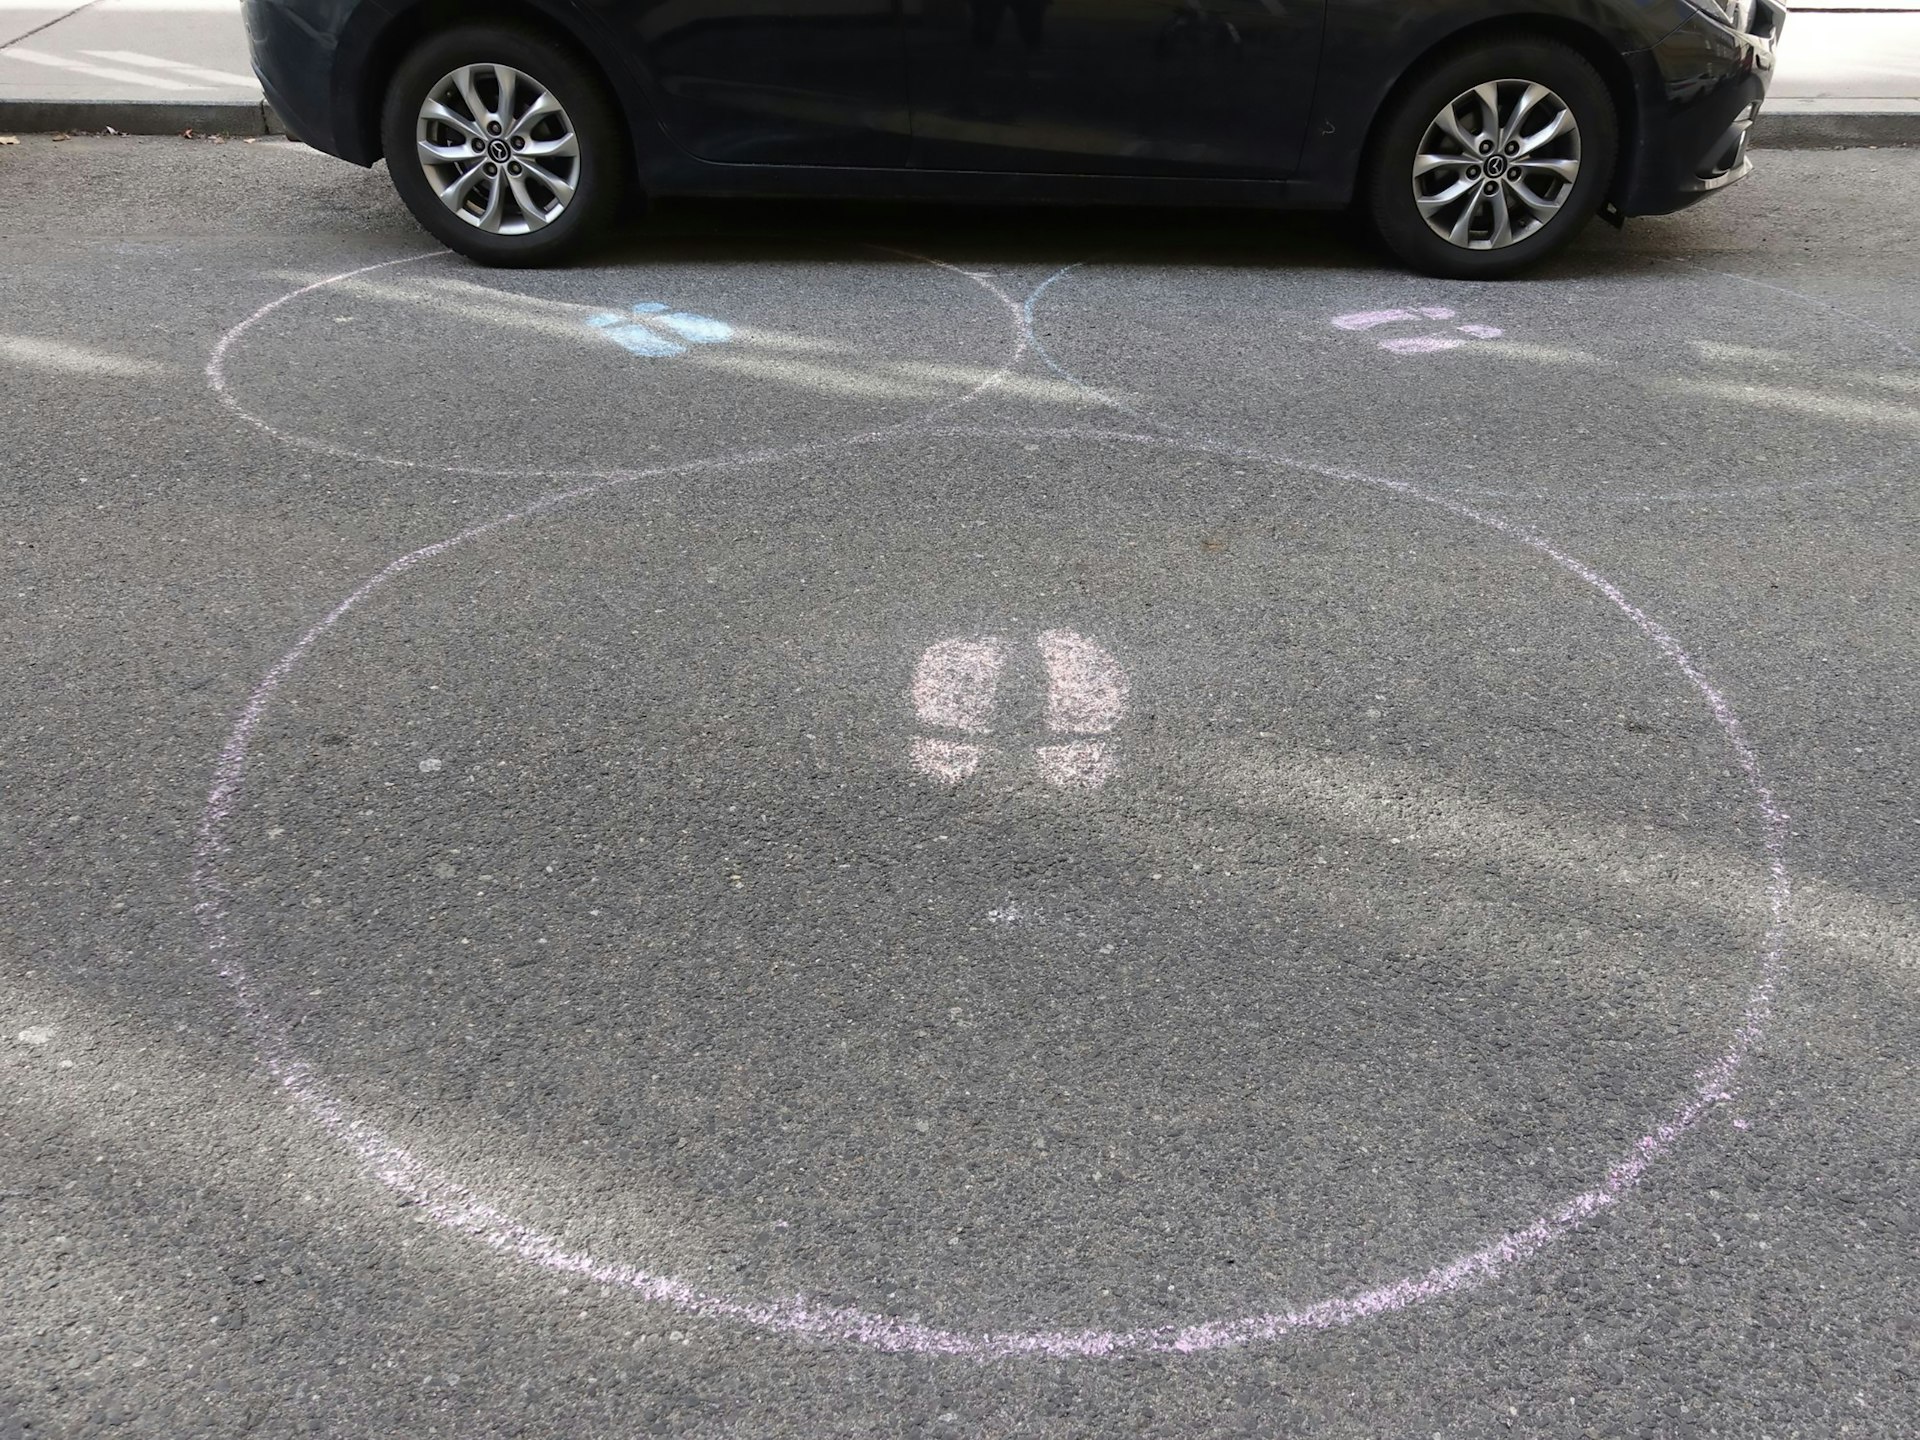 A picture of a social distancing bubble drawn on a street